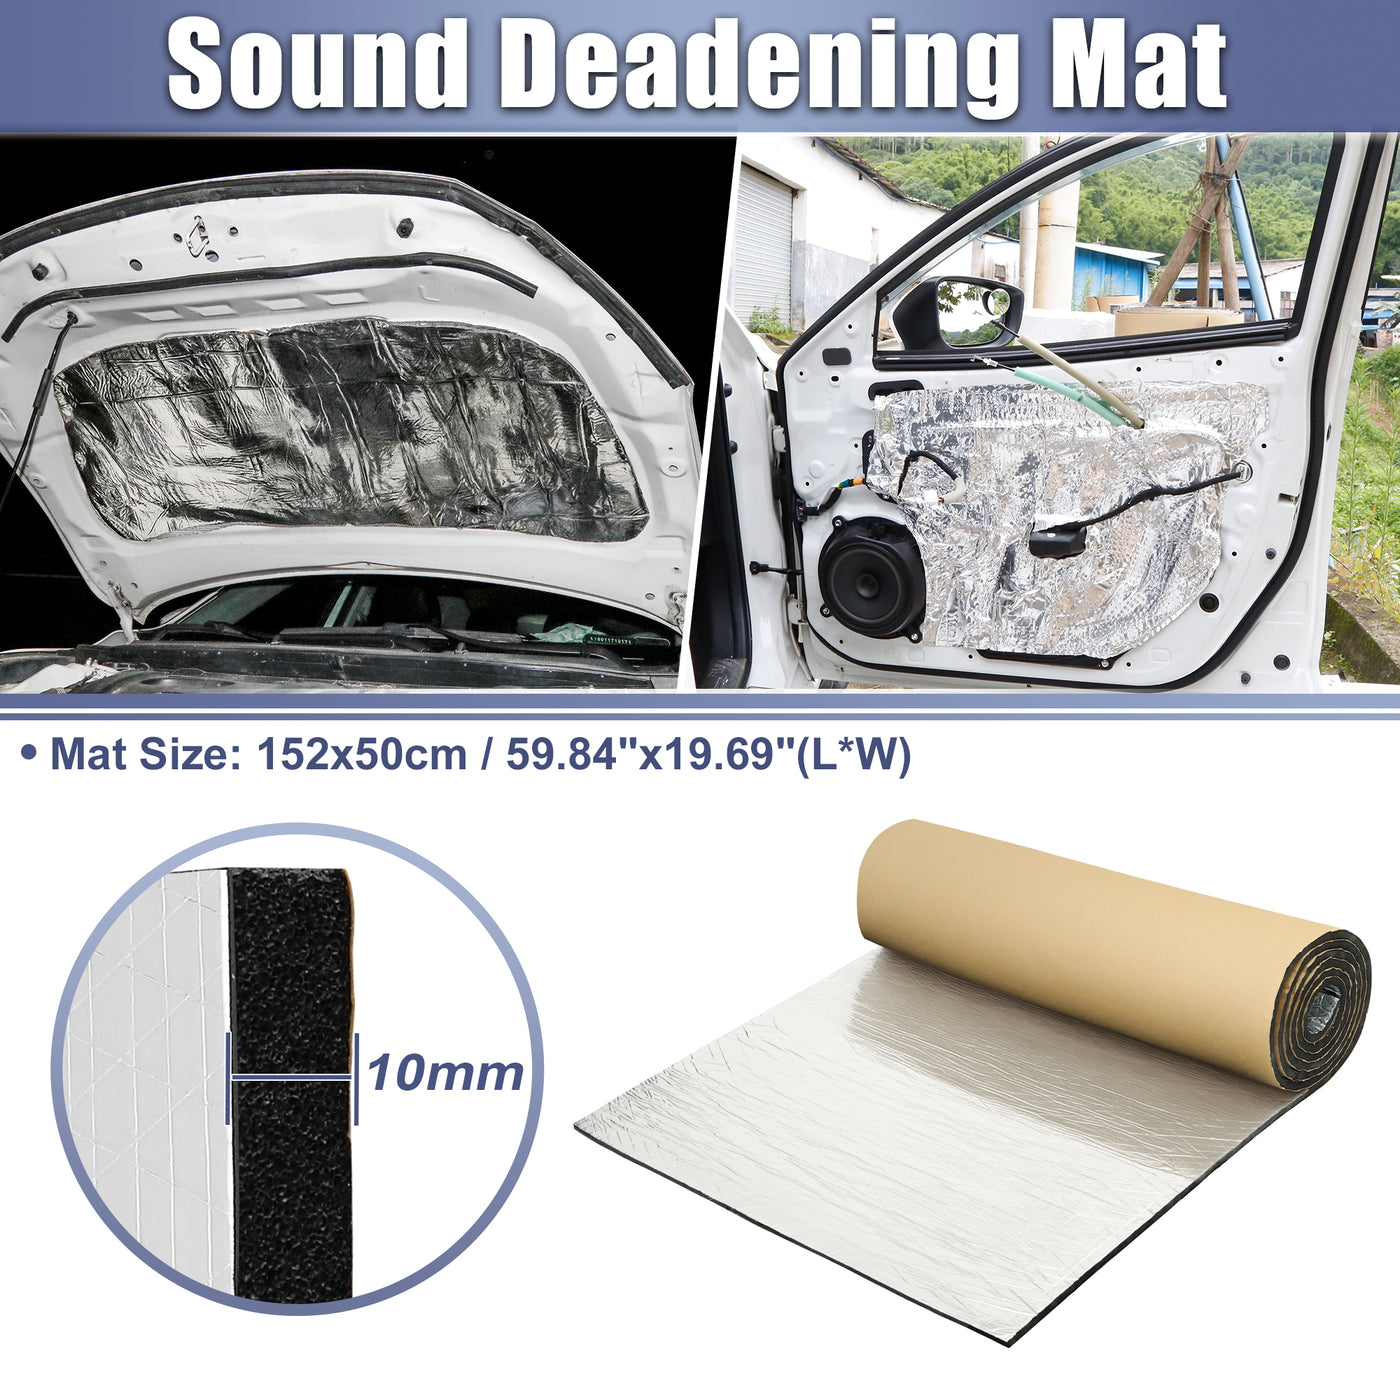 X AUTOHAUX 394mil 10mm 8.18sqft Car Sound Deadening Mat Aluminum Foil Closed Cell Foam Heat Shield Material Damping Self Adhesive Universal for Hood Fender and Boat Engine Cover 59.84"x19.69"